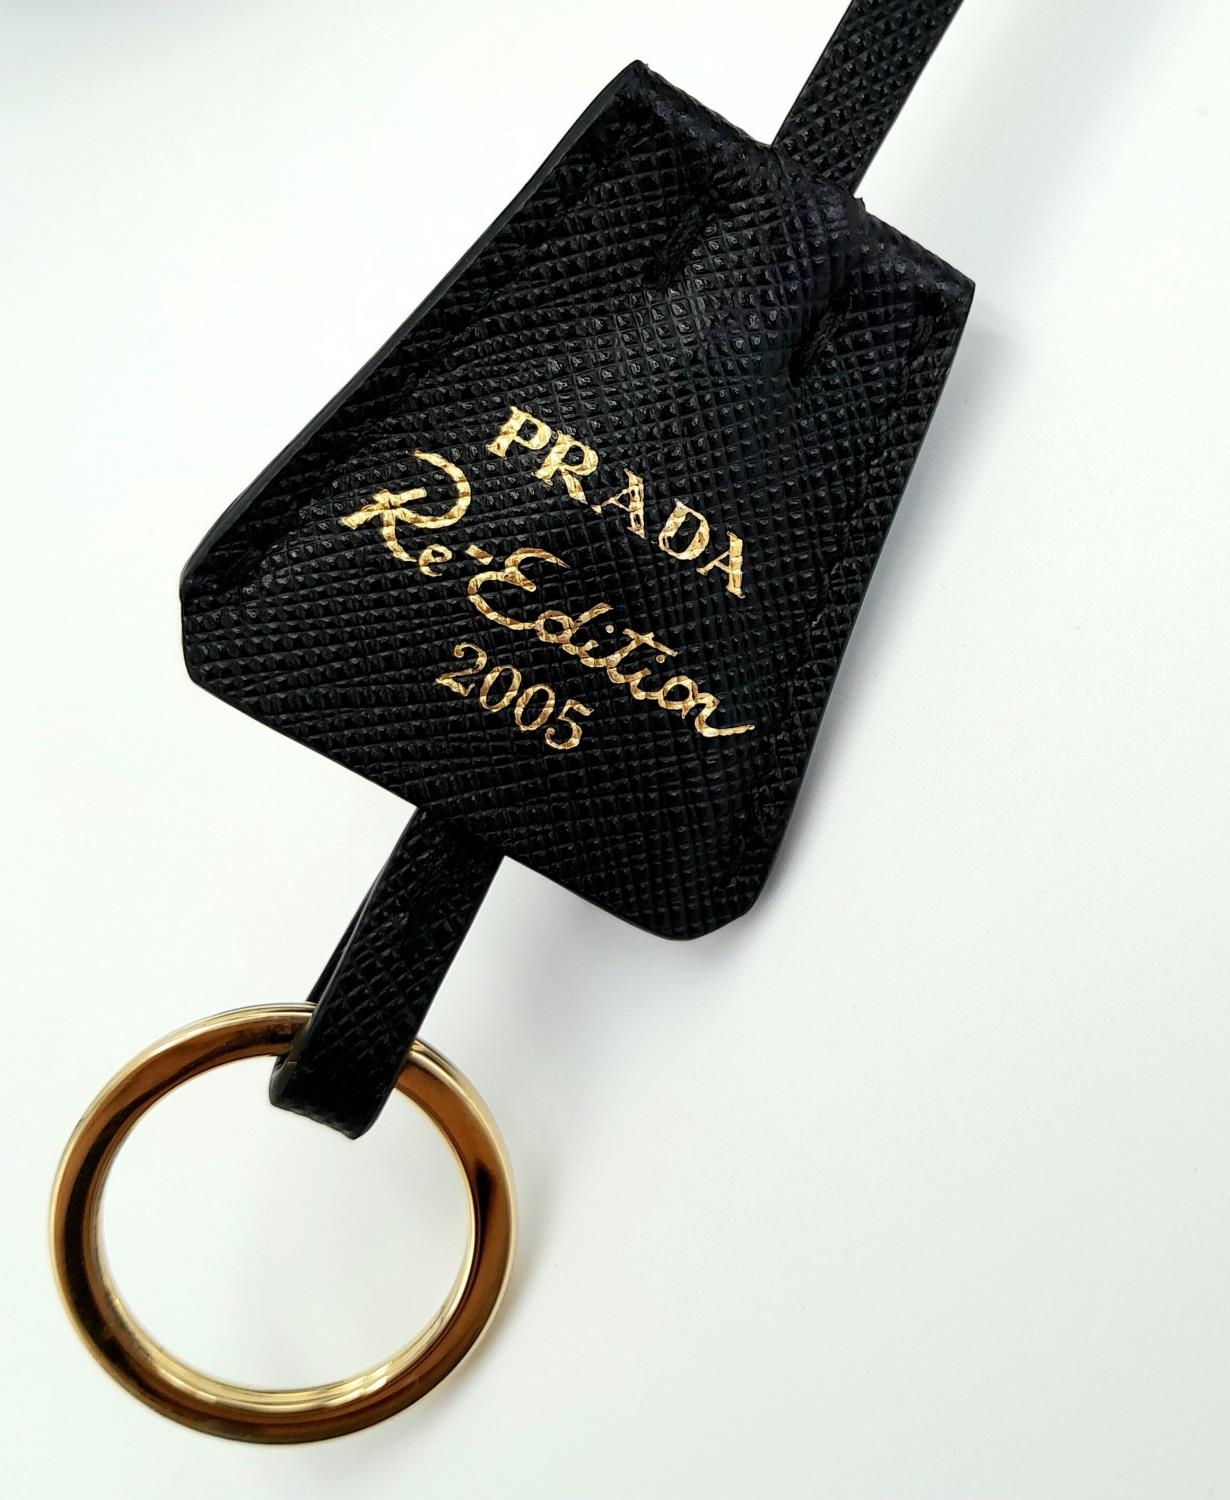 A Prada Black Re-Edition 2005 Bag. Saffiano leather exterior with gold-toned hardware, zip top - Image 9 of 15